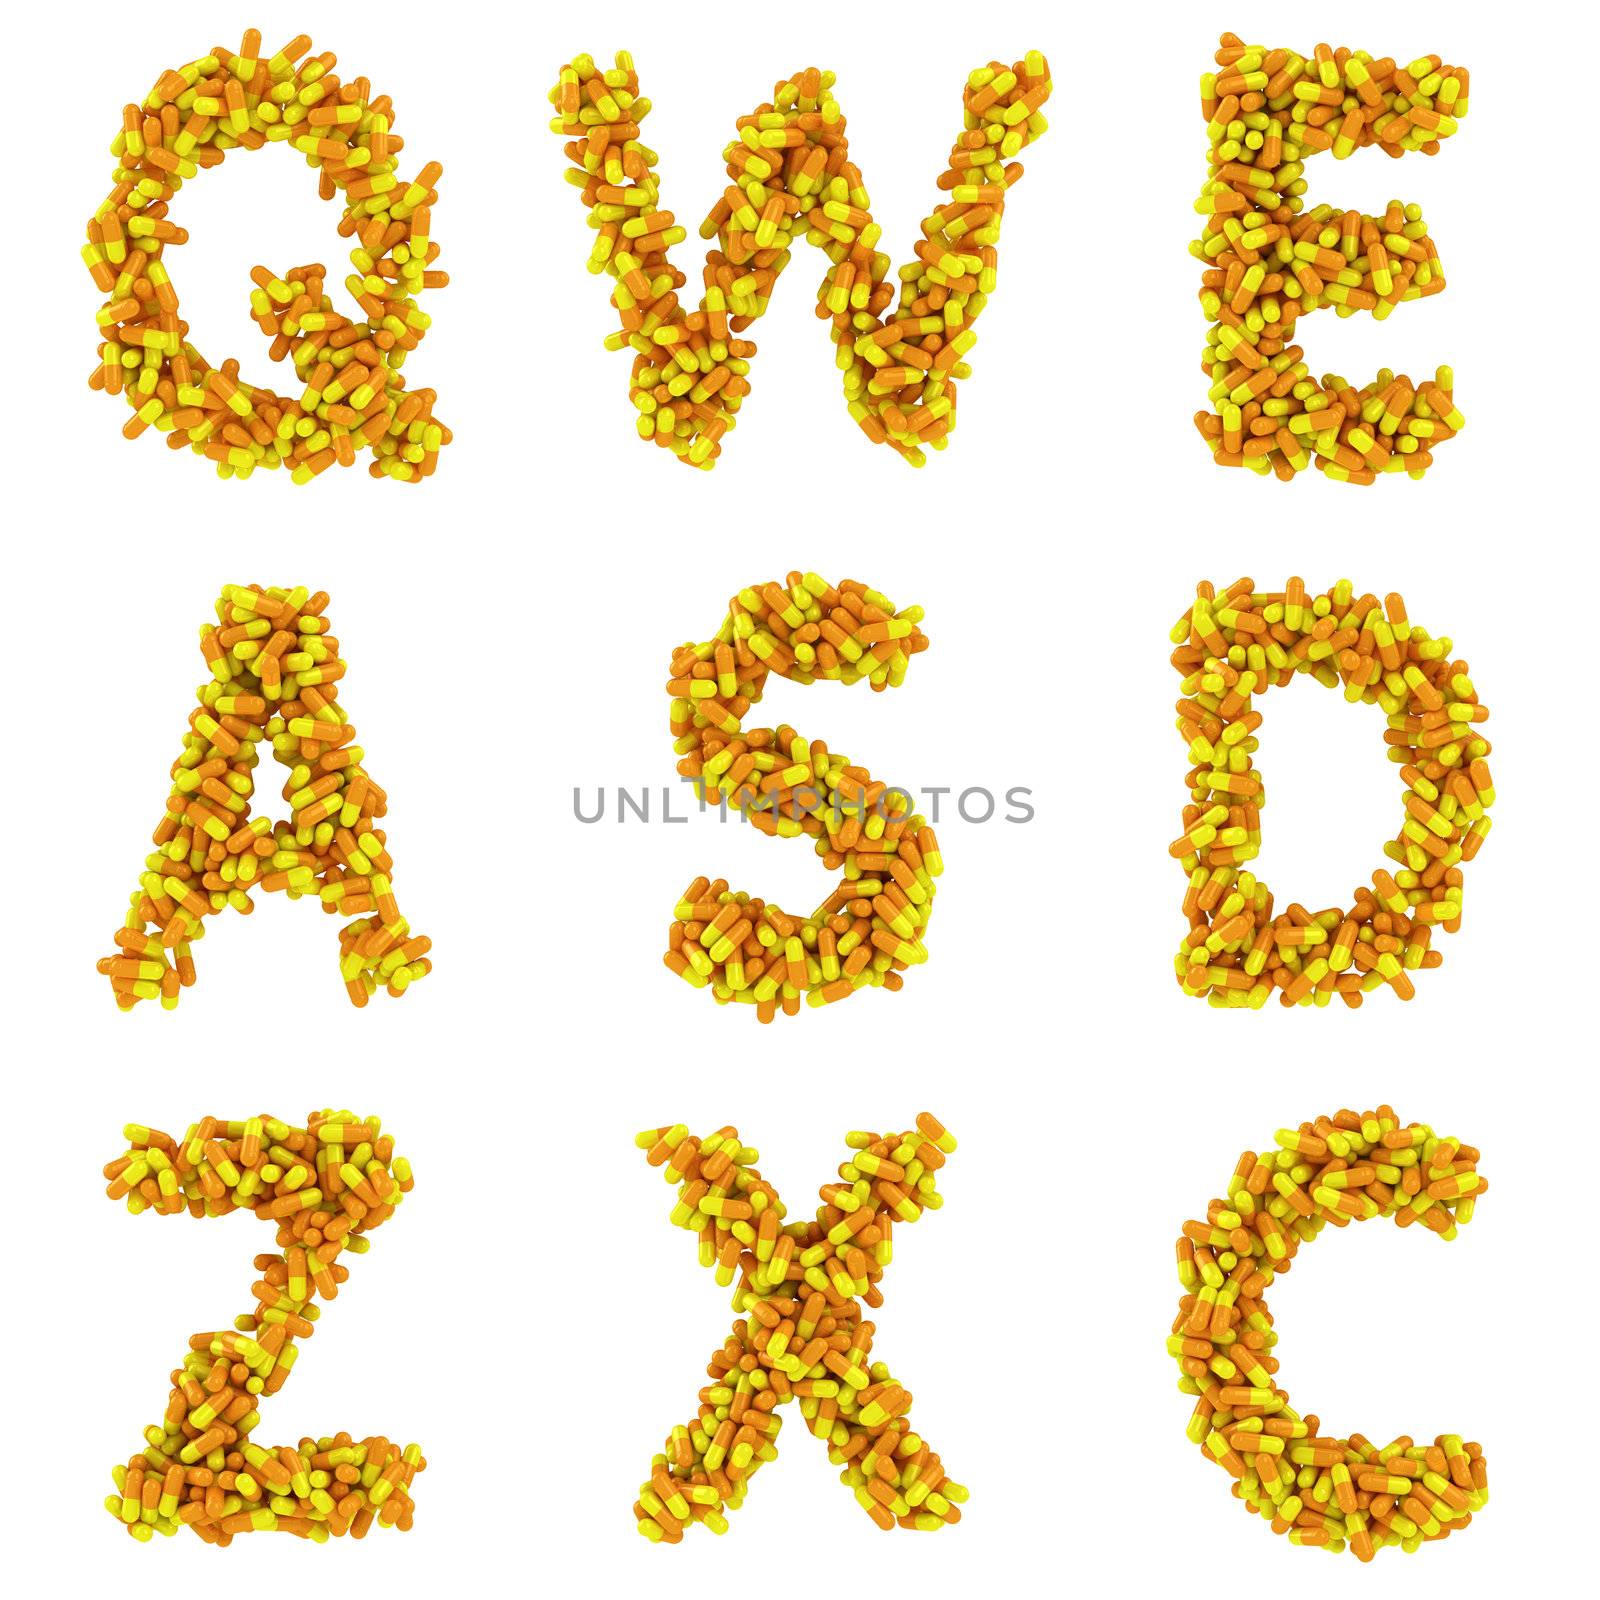 Capital letters of alphabet made from medical capsules